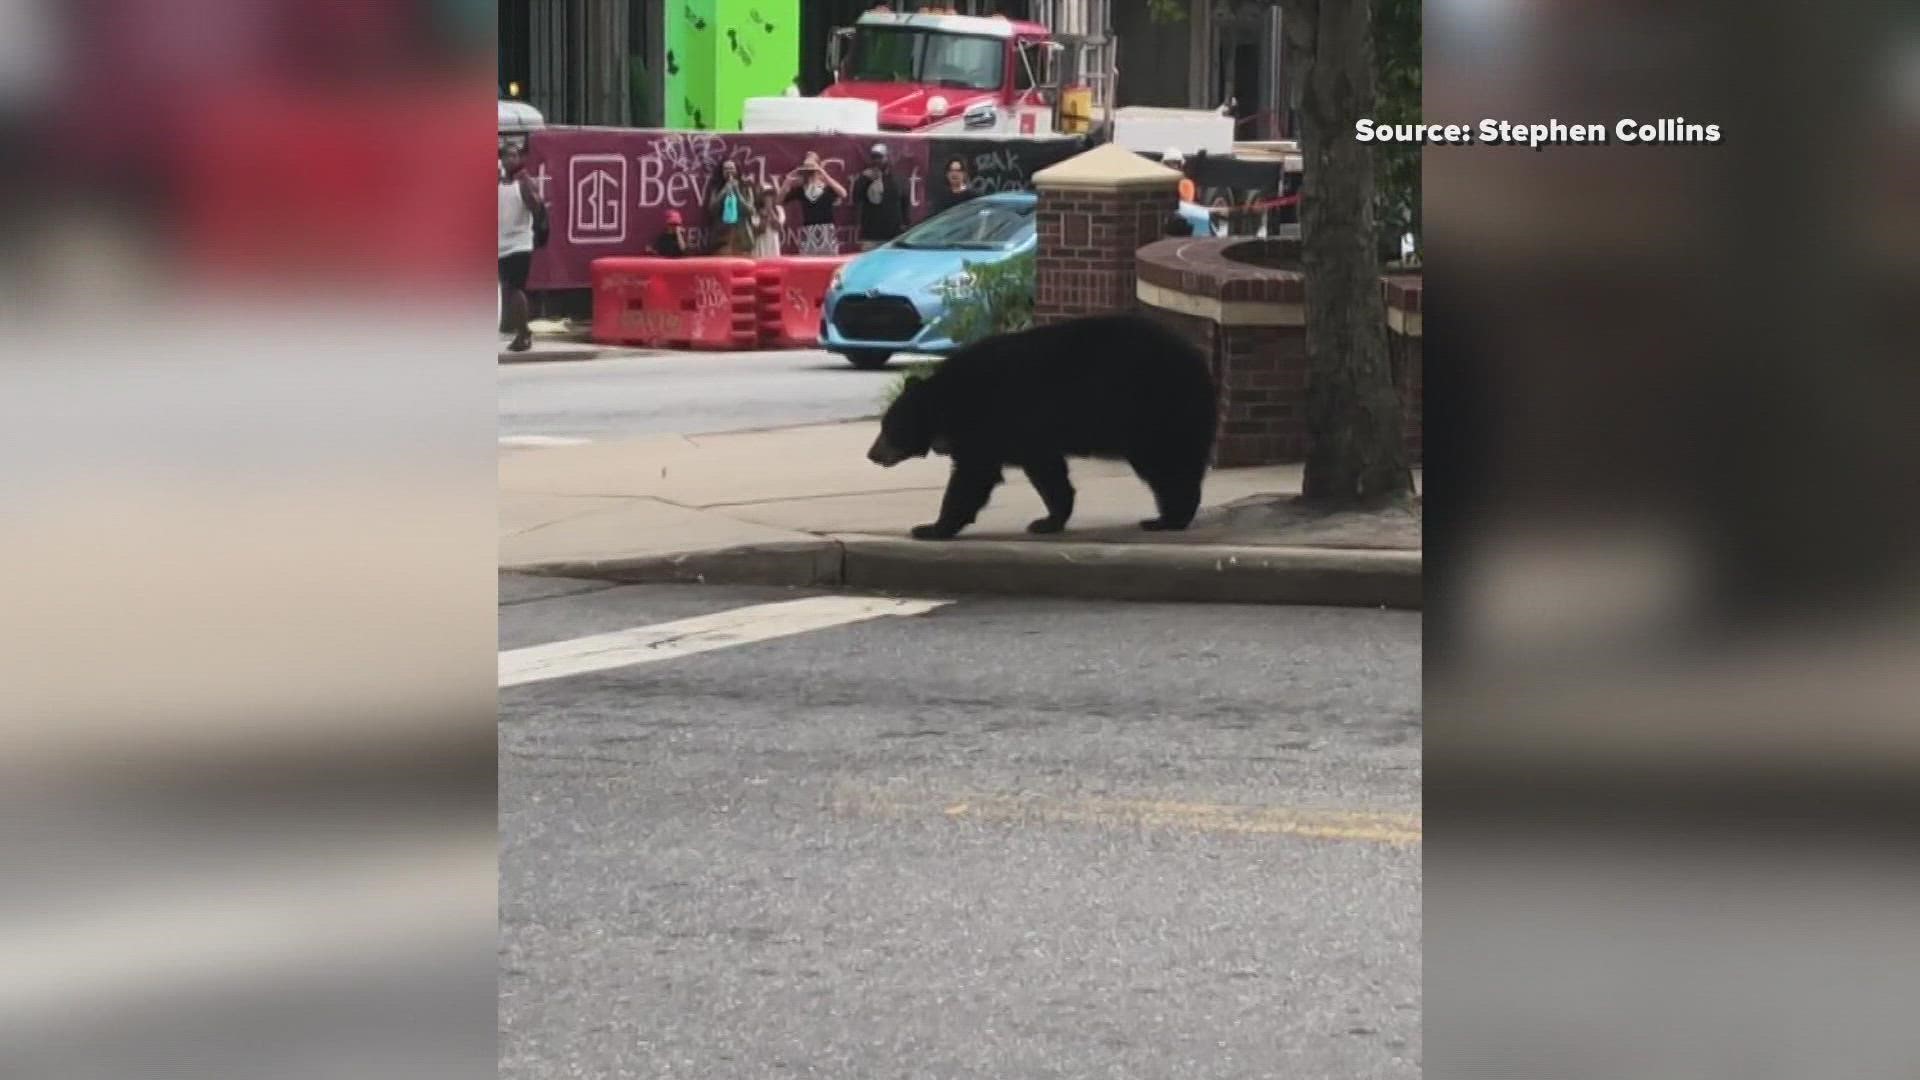 Part of the reason for more bear sightings is that the bear population in North Carolina has been on the rise for about 50 years.